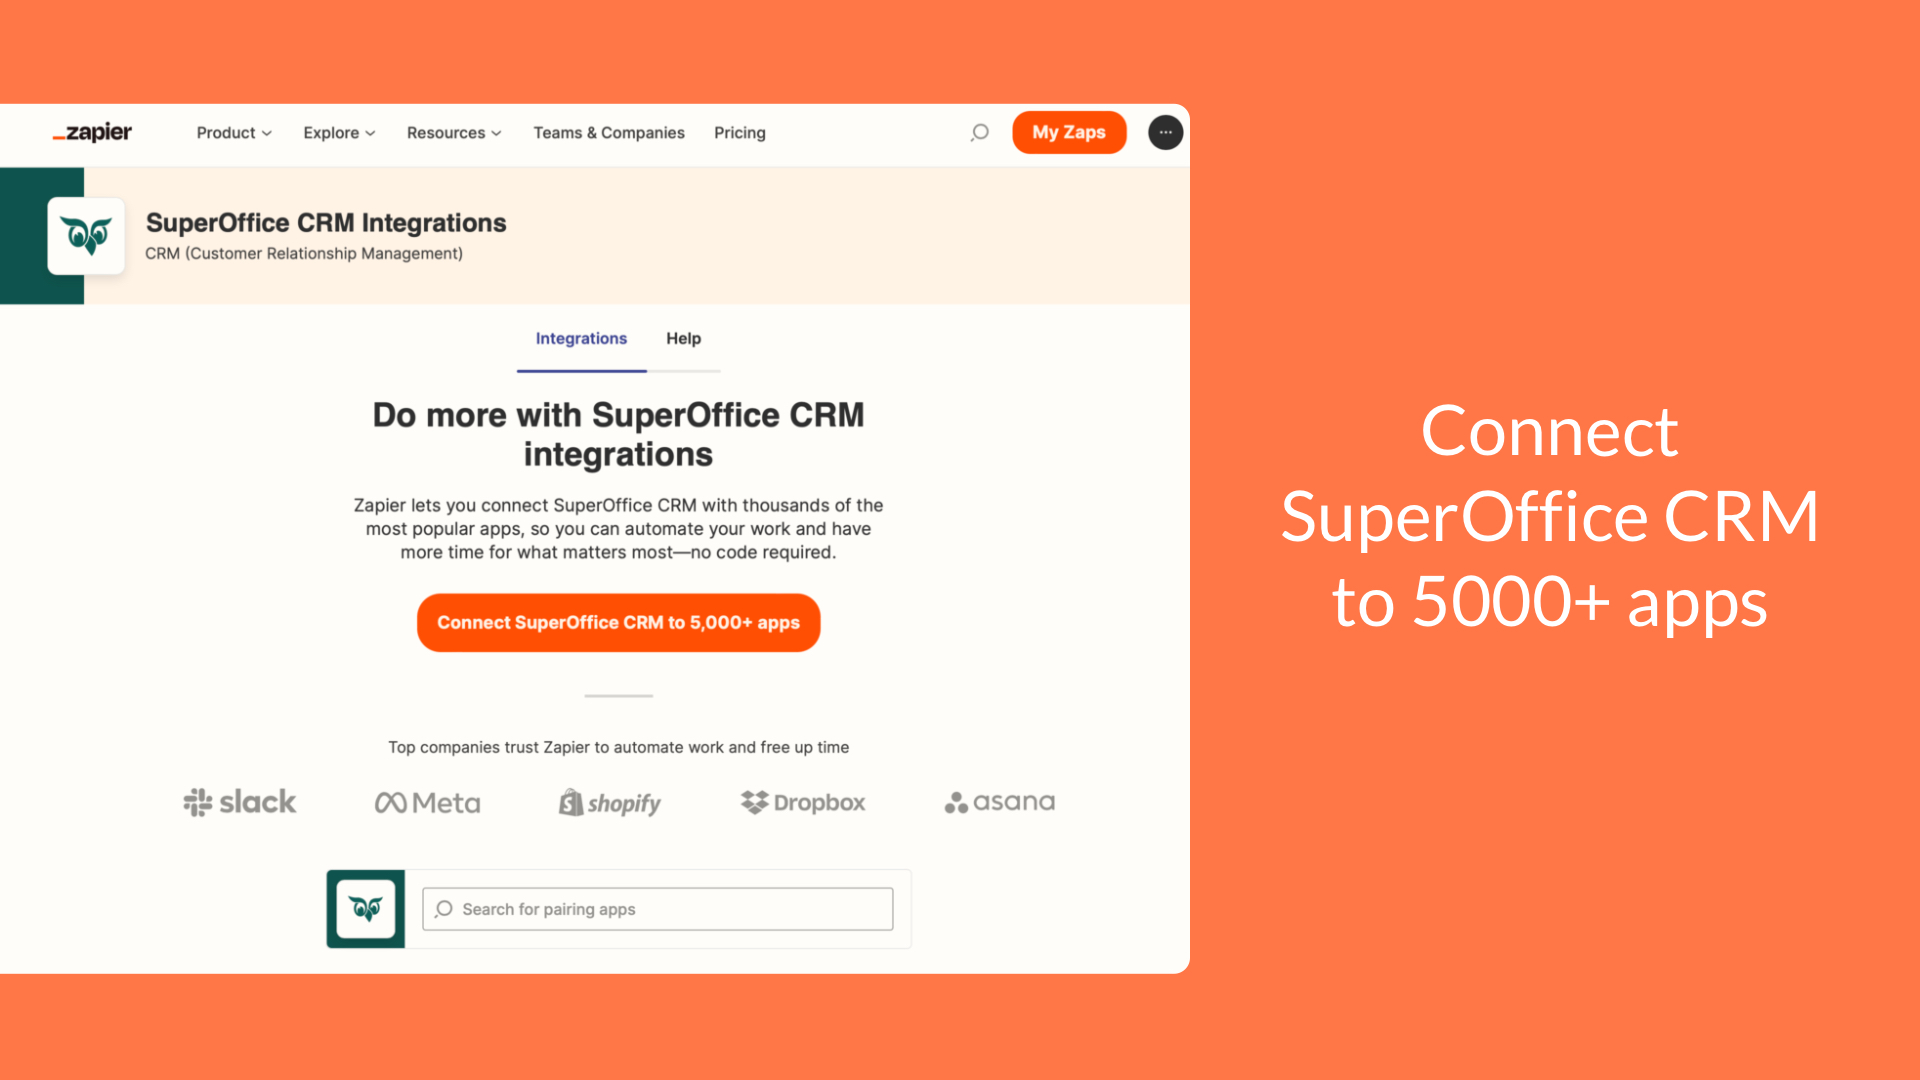 01 Connect SuperOffice CRM to 5000+ apps.jpg